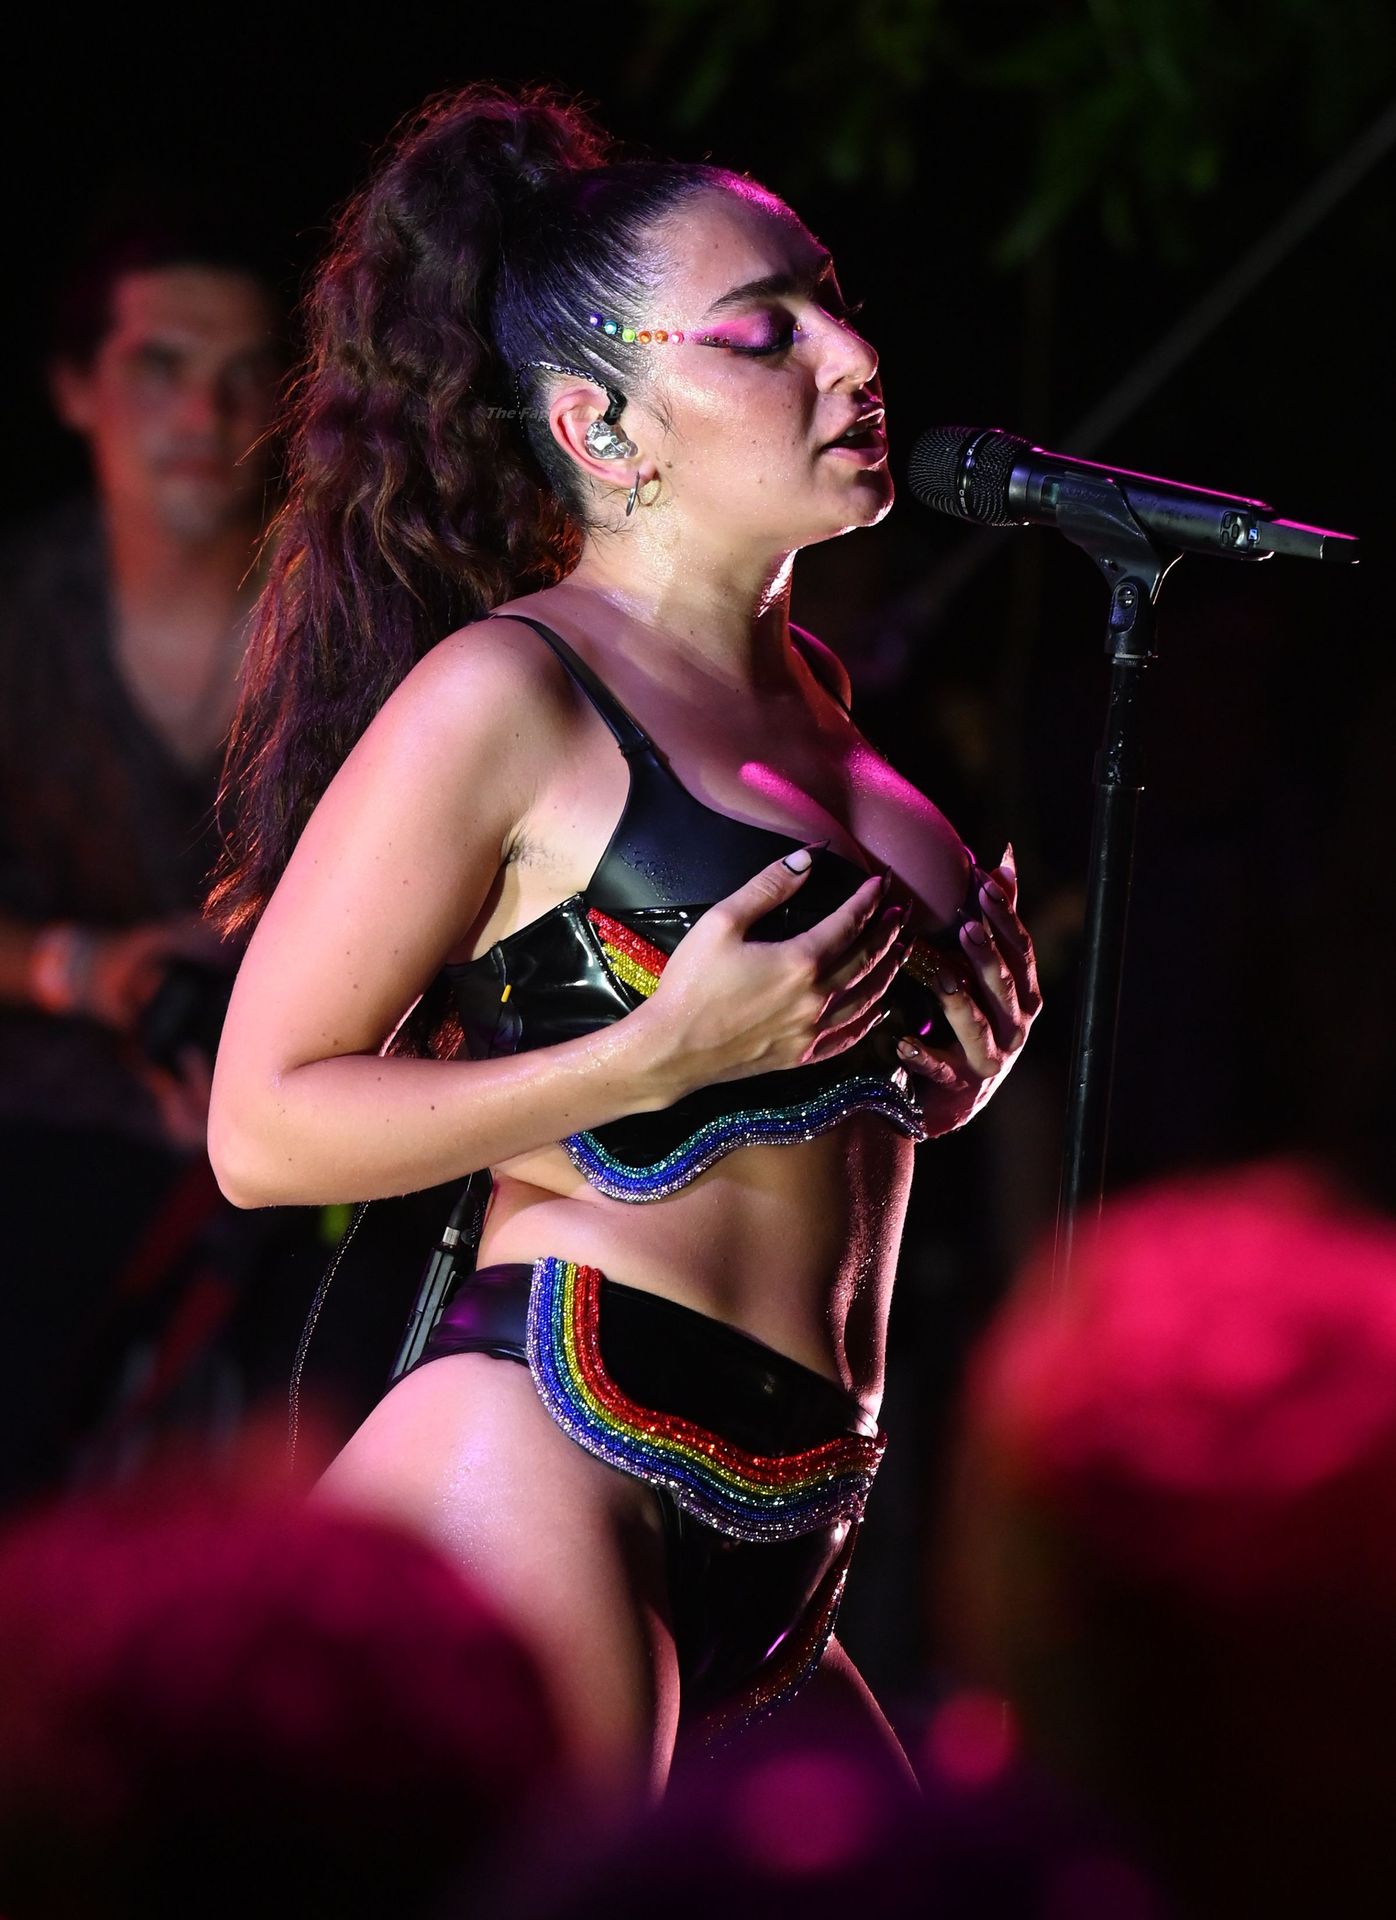 Charli-XCX-Sexy-The-Fappening-Blog-21.jpg.